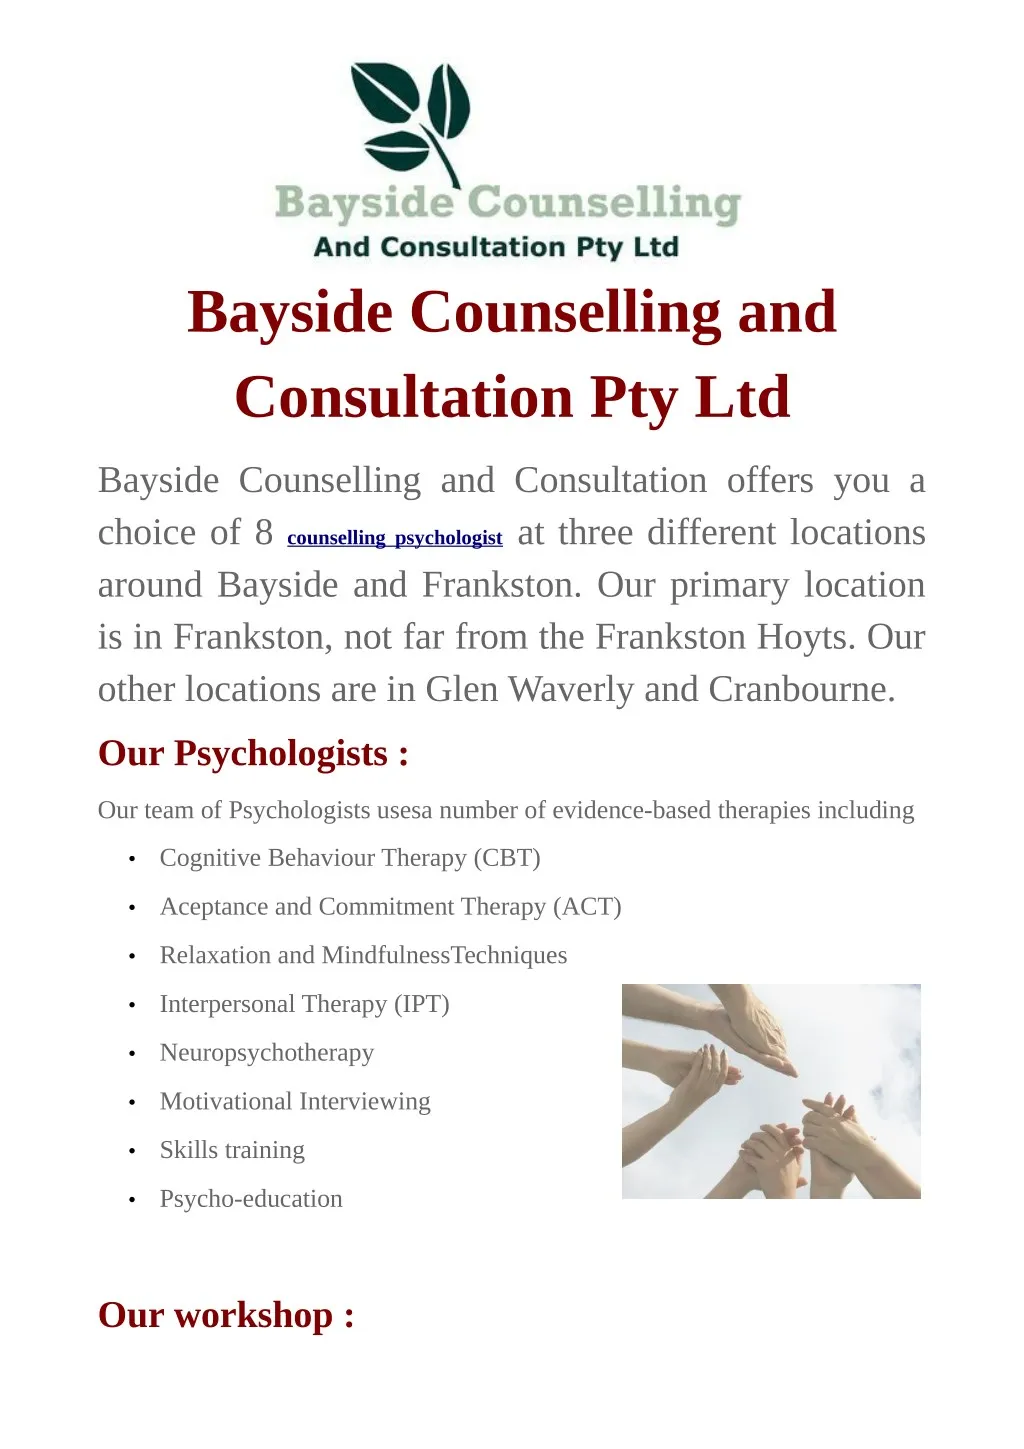 bayside counselling and consultation pty ltd